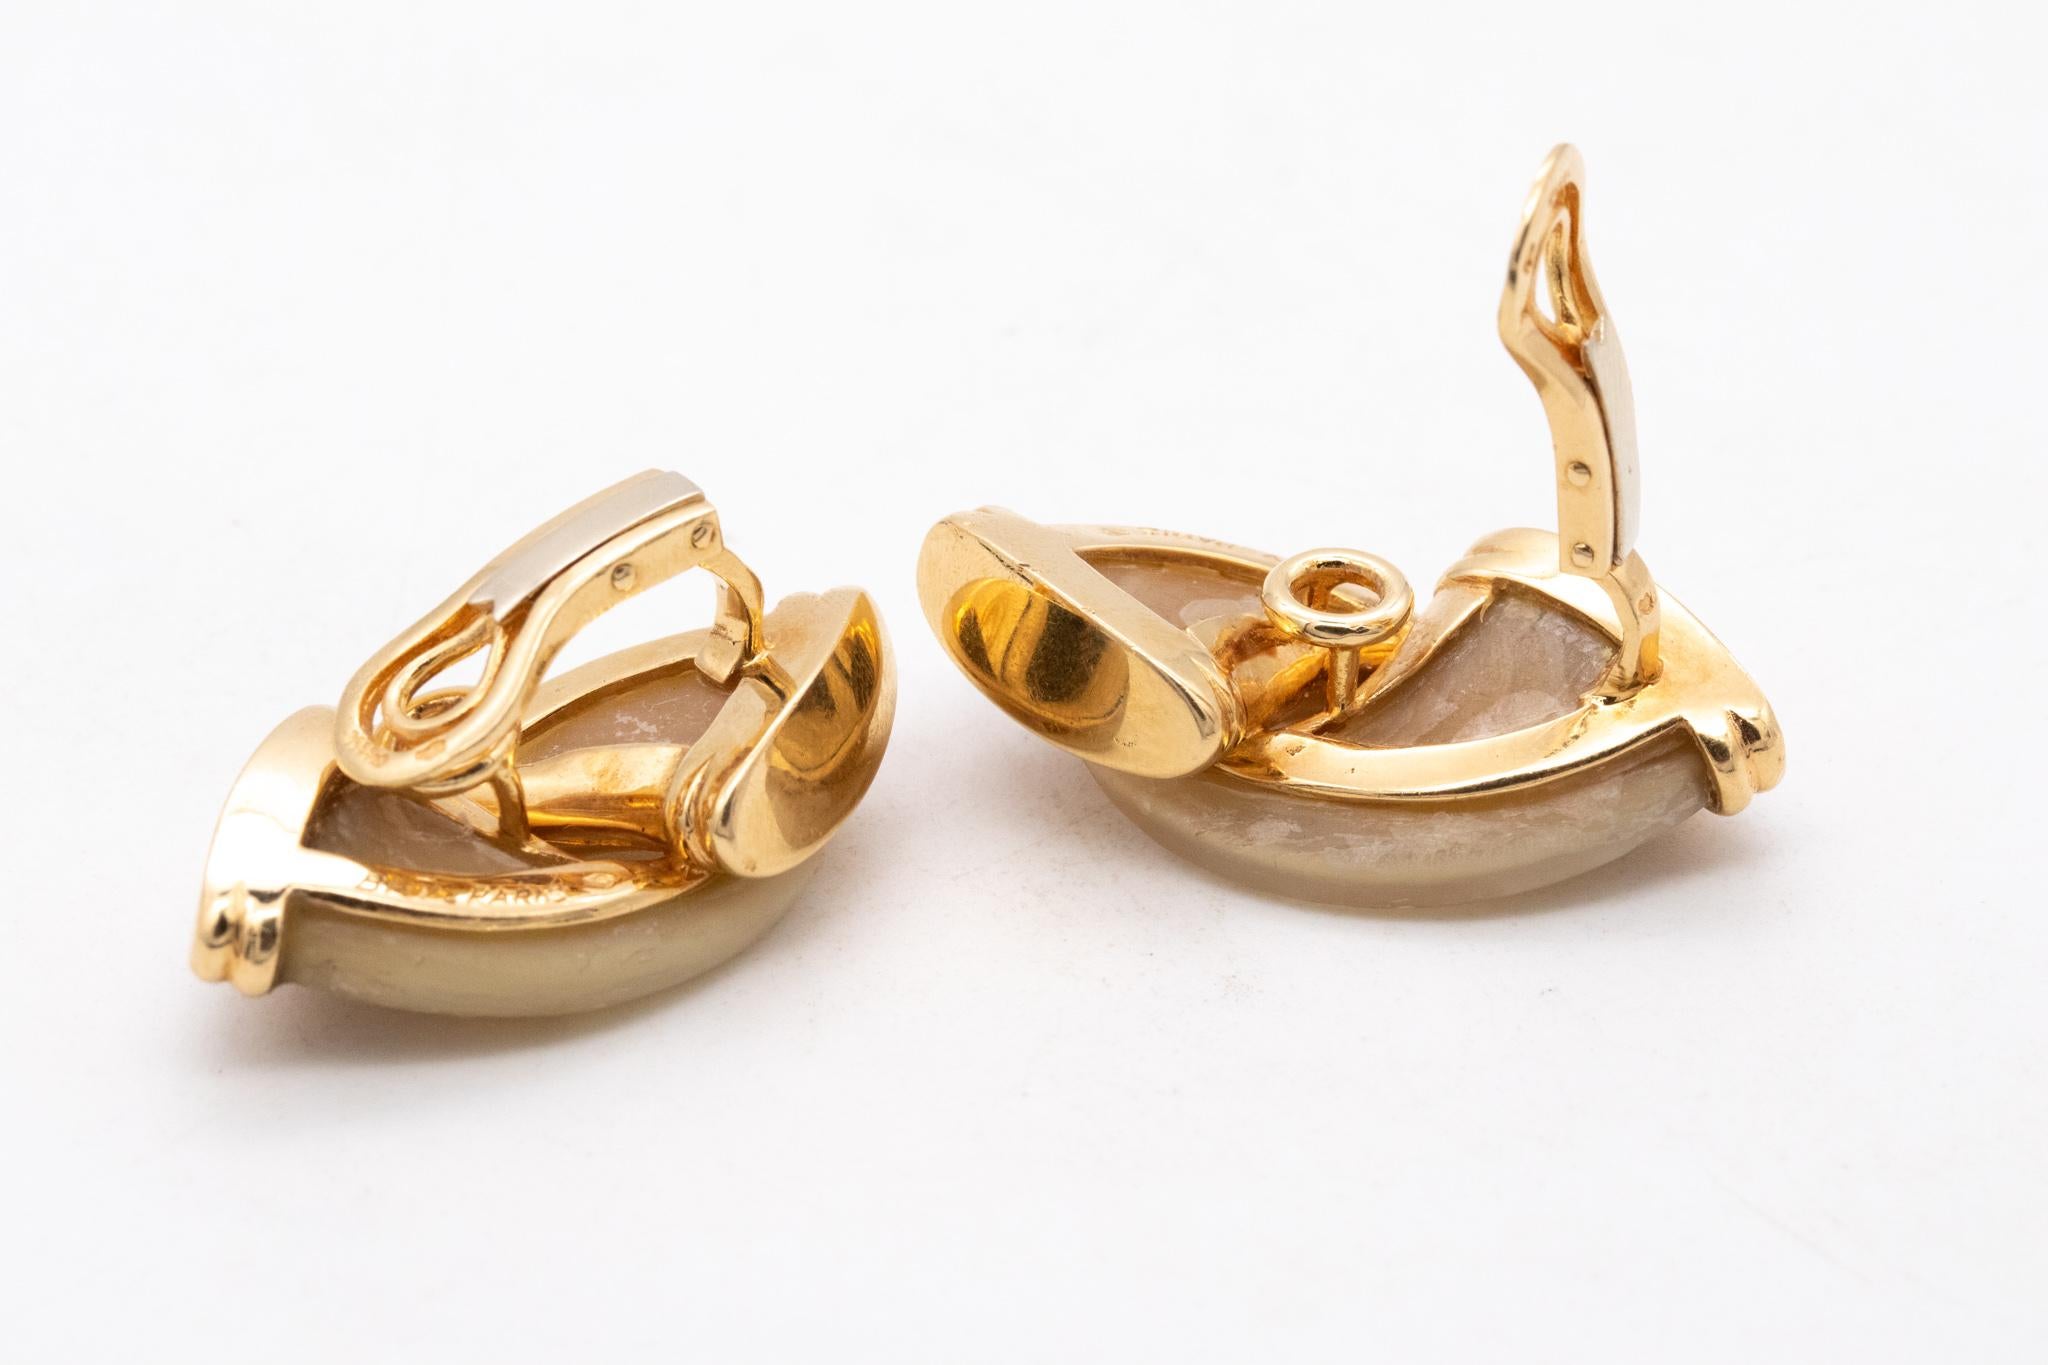 Women's Bry & Co Paris 1970 Rare French Earrings In 18Kt Yellow Gold With Four Claws For Sale